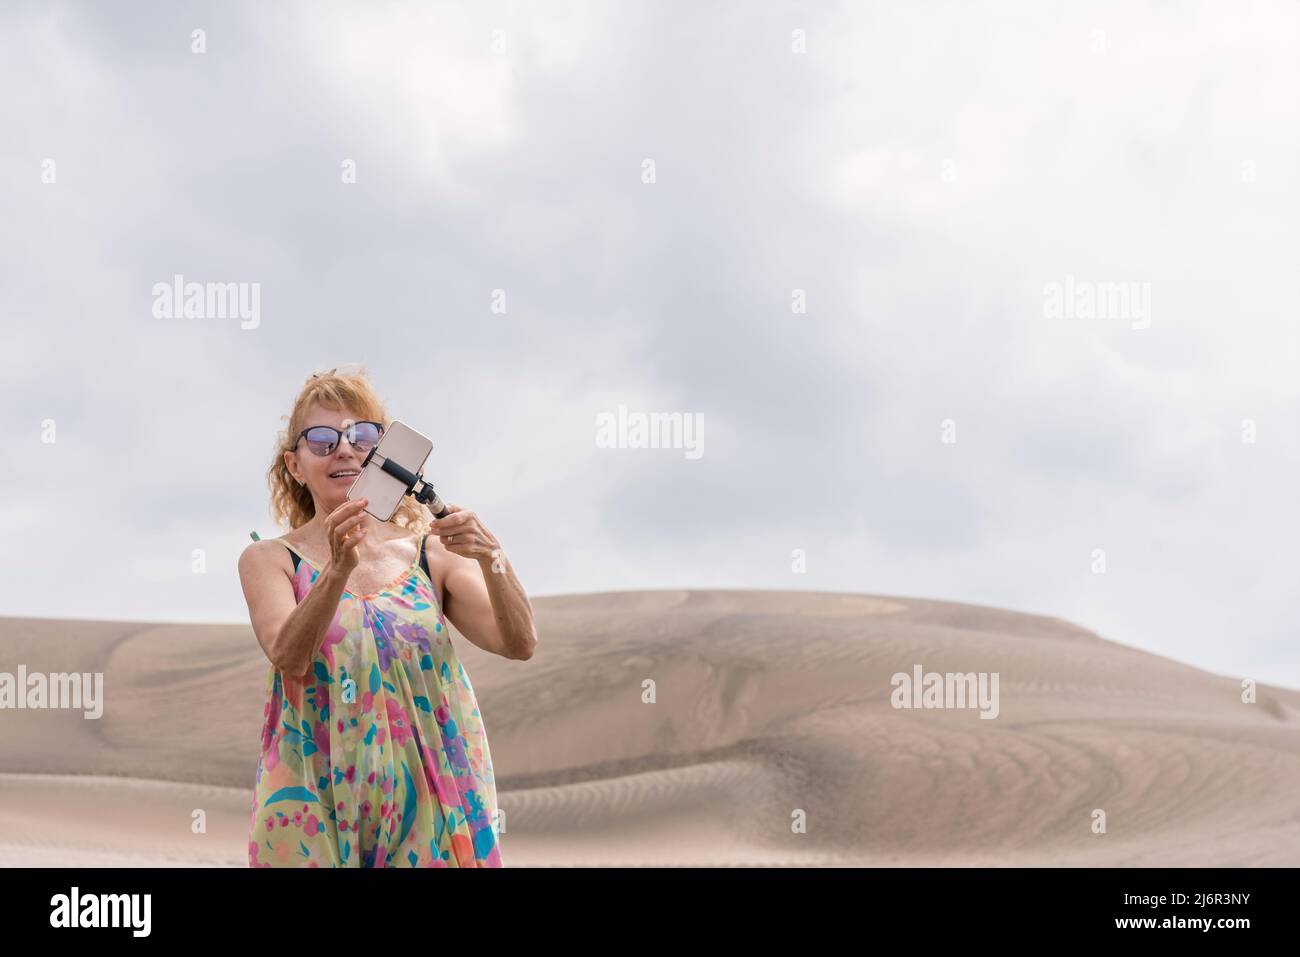 Blonde woman in dress doing a selfie with the mobile in the middle of dunes Stock Photo